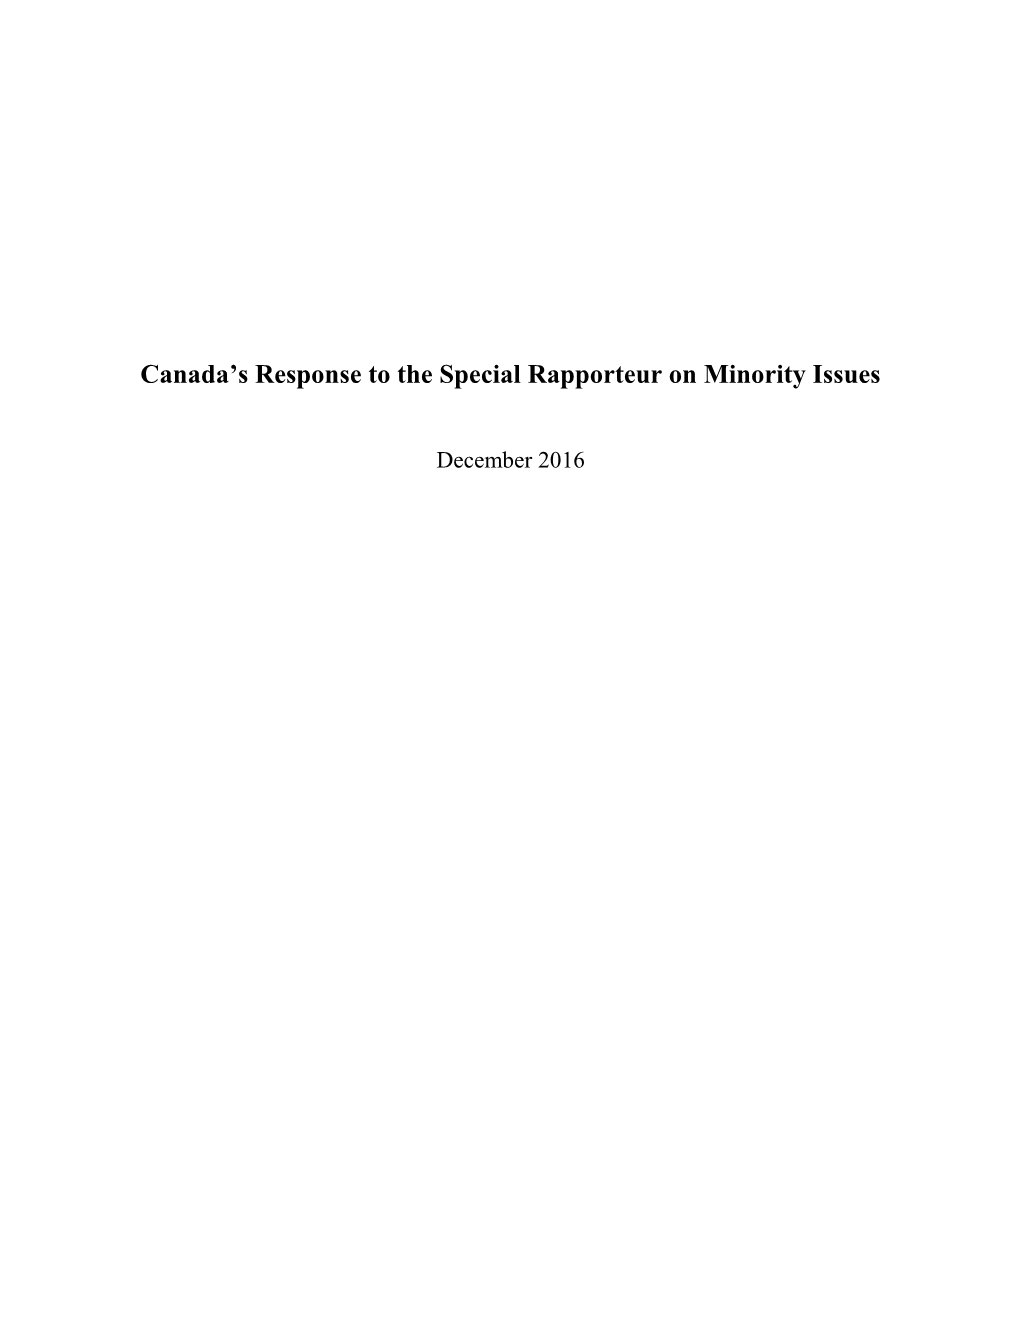 Canada's Response to the Special Rapporteur on Minority Issues